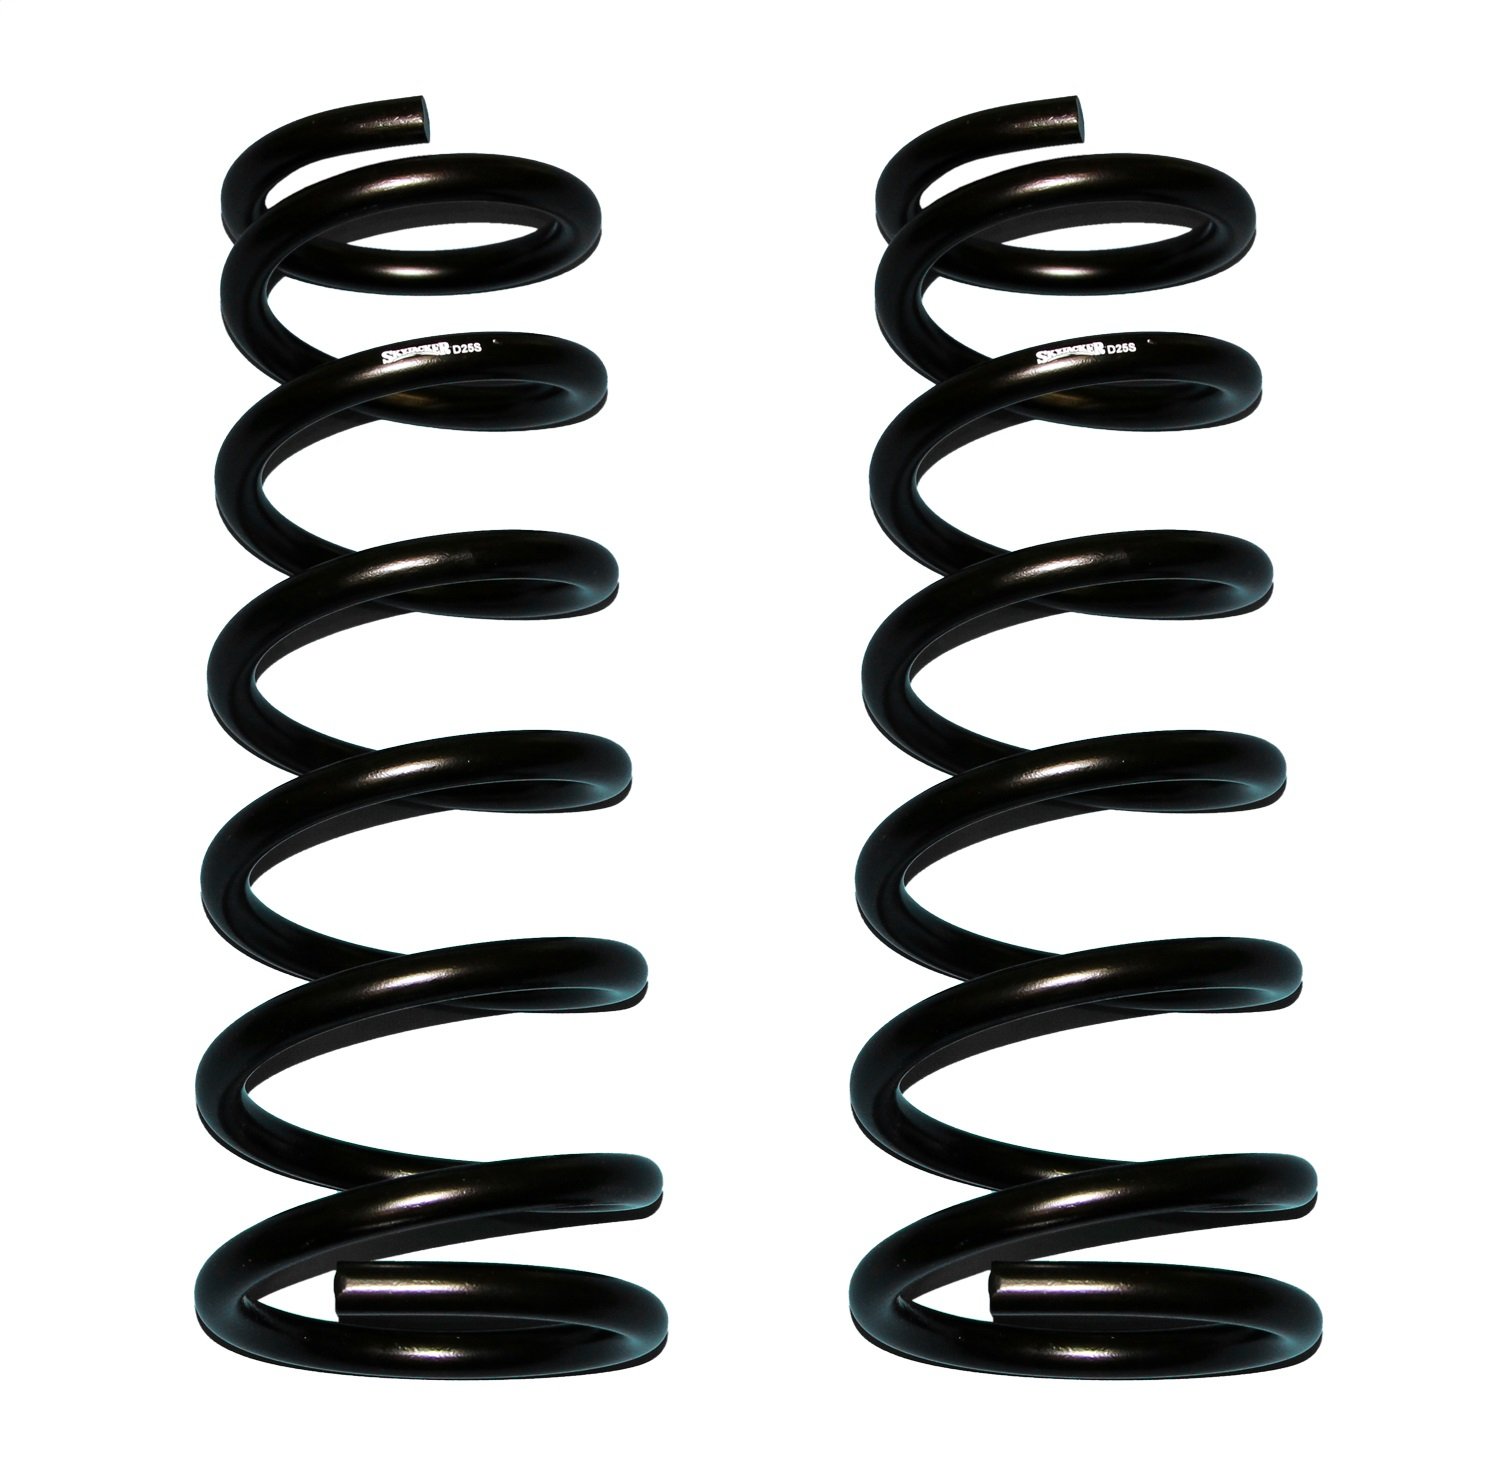 Softride Front Coil Springs 1994-2012 Ram Pickup 3/4-Ton Heavy Duty & Ram Pickup 1-Ton (2-2.5" Lift)